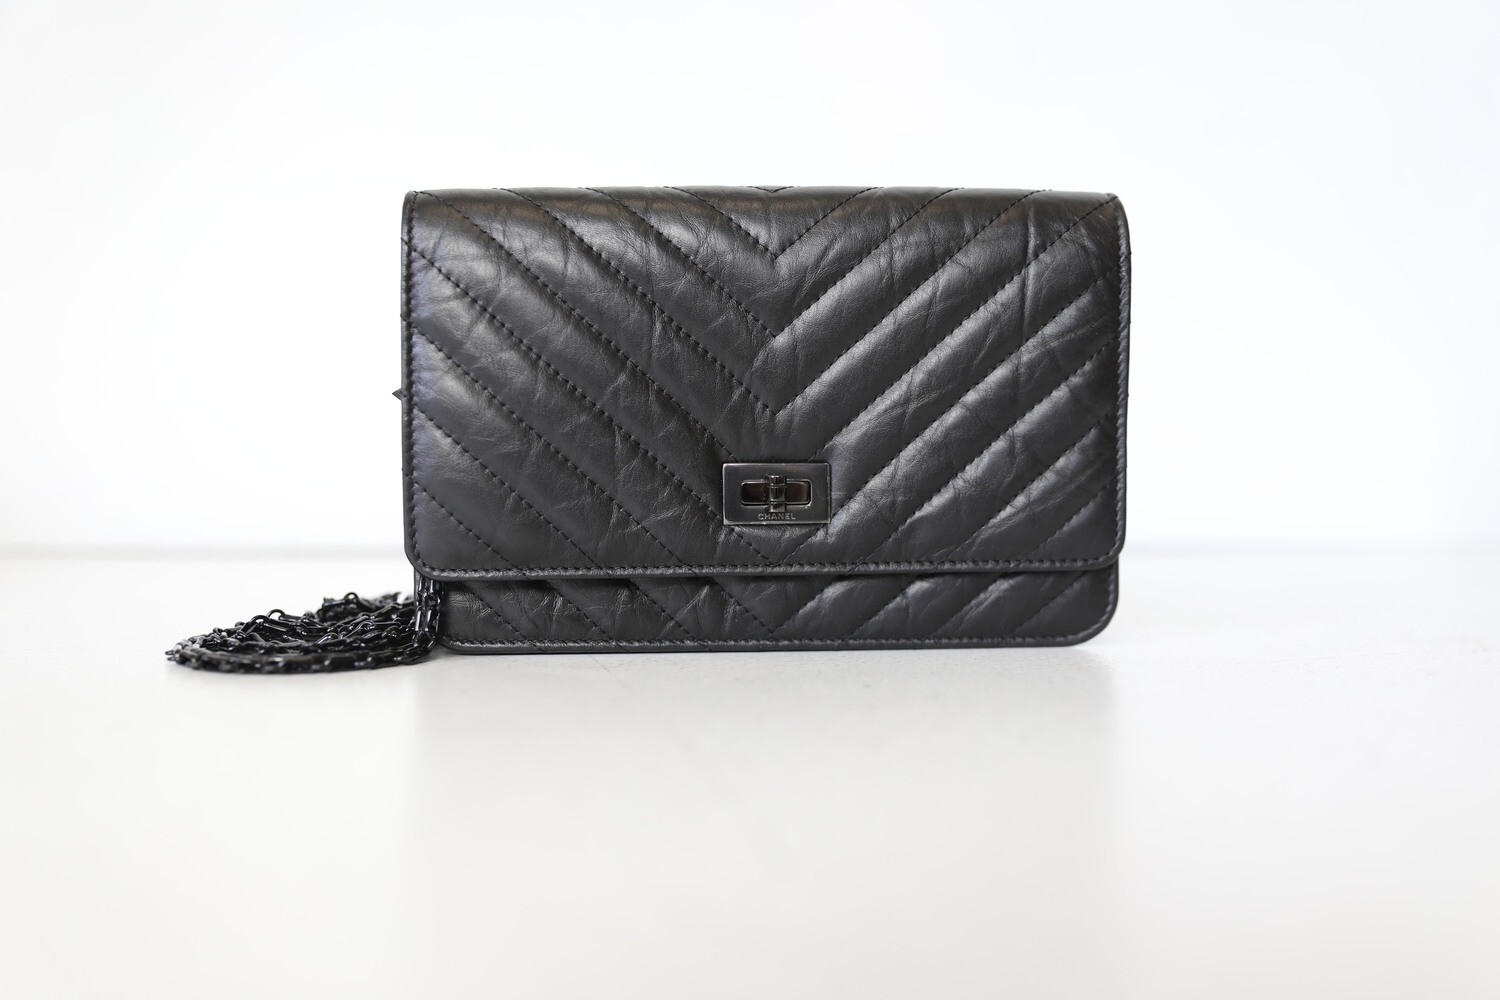 Chanel Aged Calfskin Quilted Reissue Wallet On Chain WOC Black Gold Ha –  Coco Approved Studio